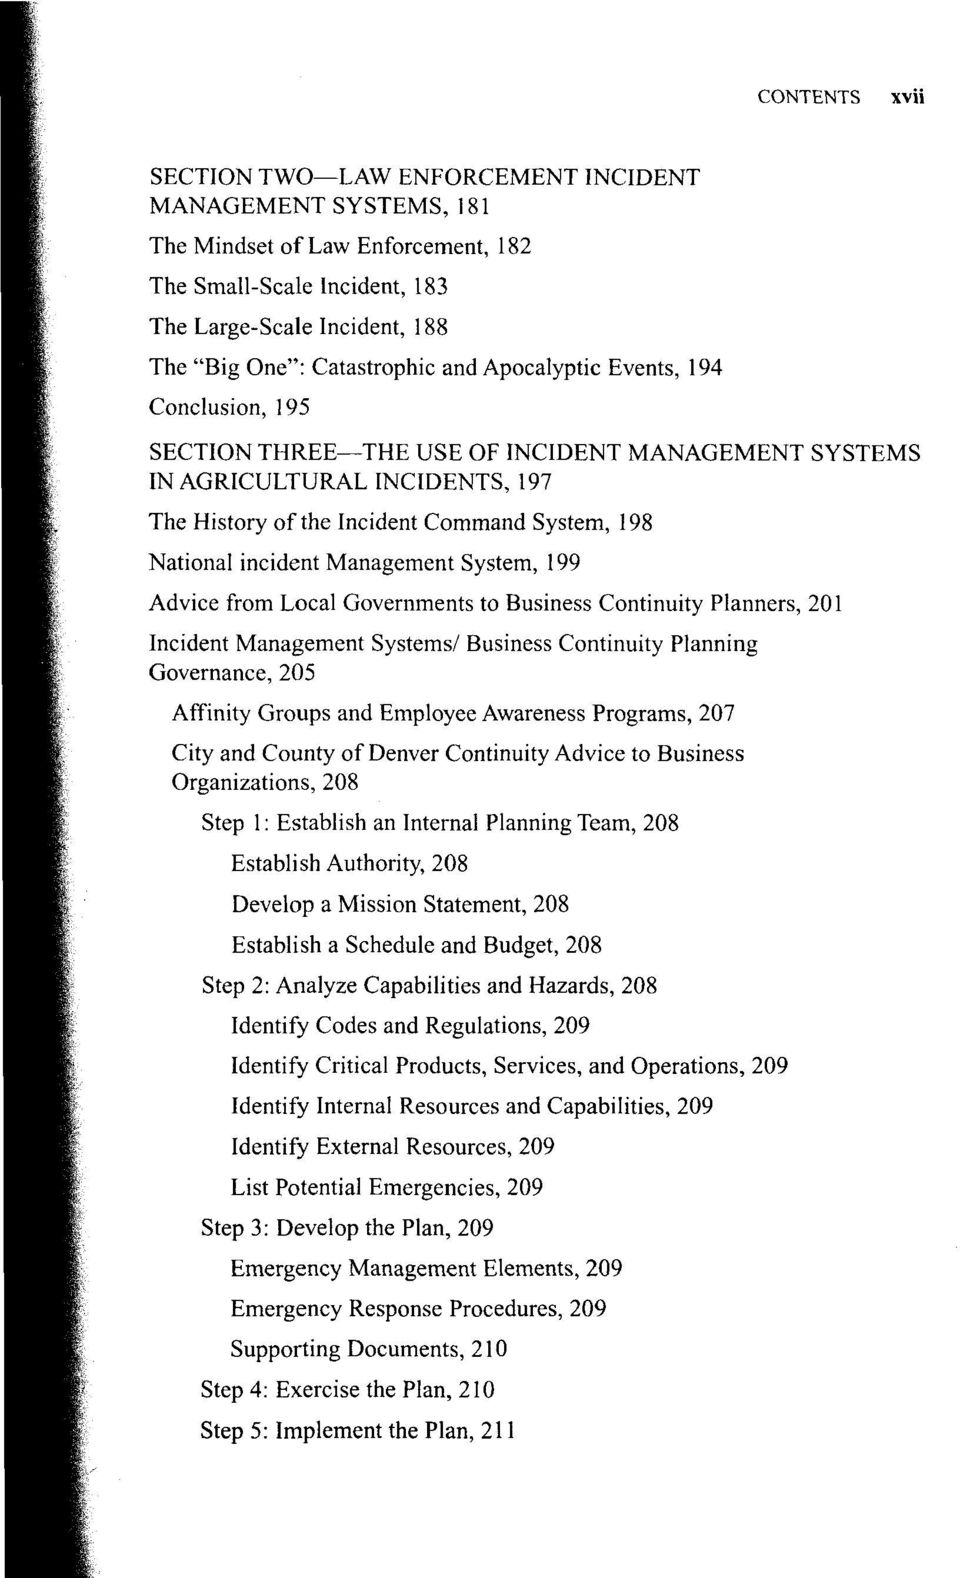 Management System, 199 Advice from Local Governments to Business Continuity Planners, 201 Incident Management Systems/ Business Continuity Planning Governance, 205 Affinity Groups and Employee